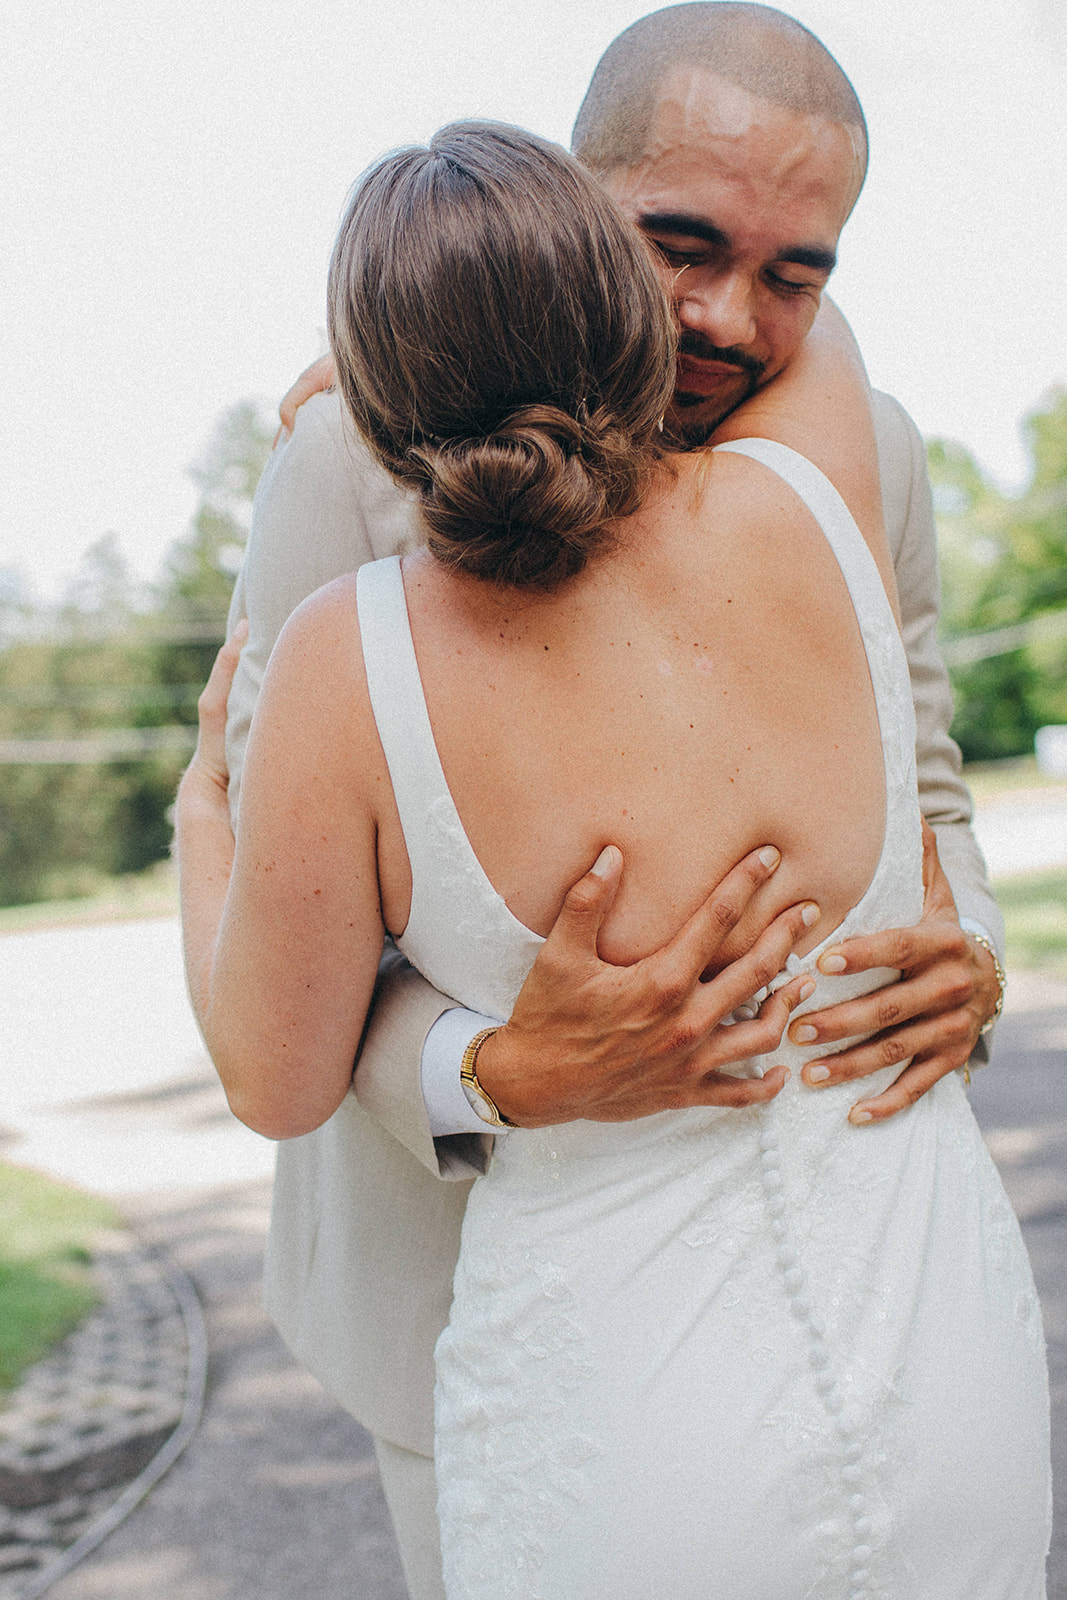 Emotional first look of a wedding couple at the Pinecroft Crosley Estate in Cincinnati, Ohio